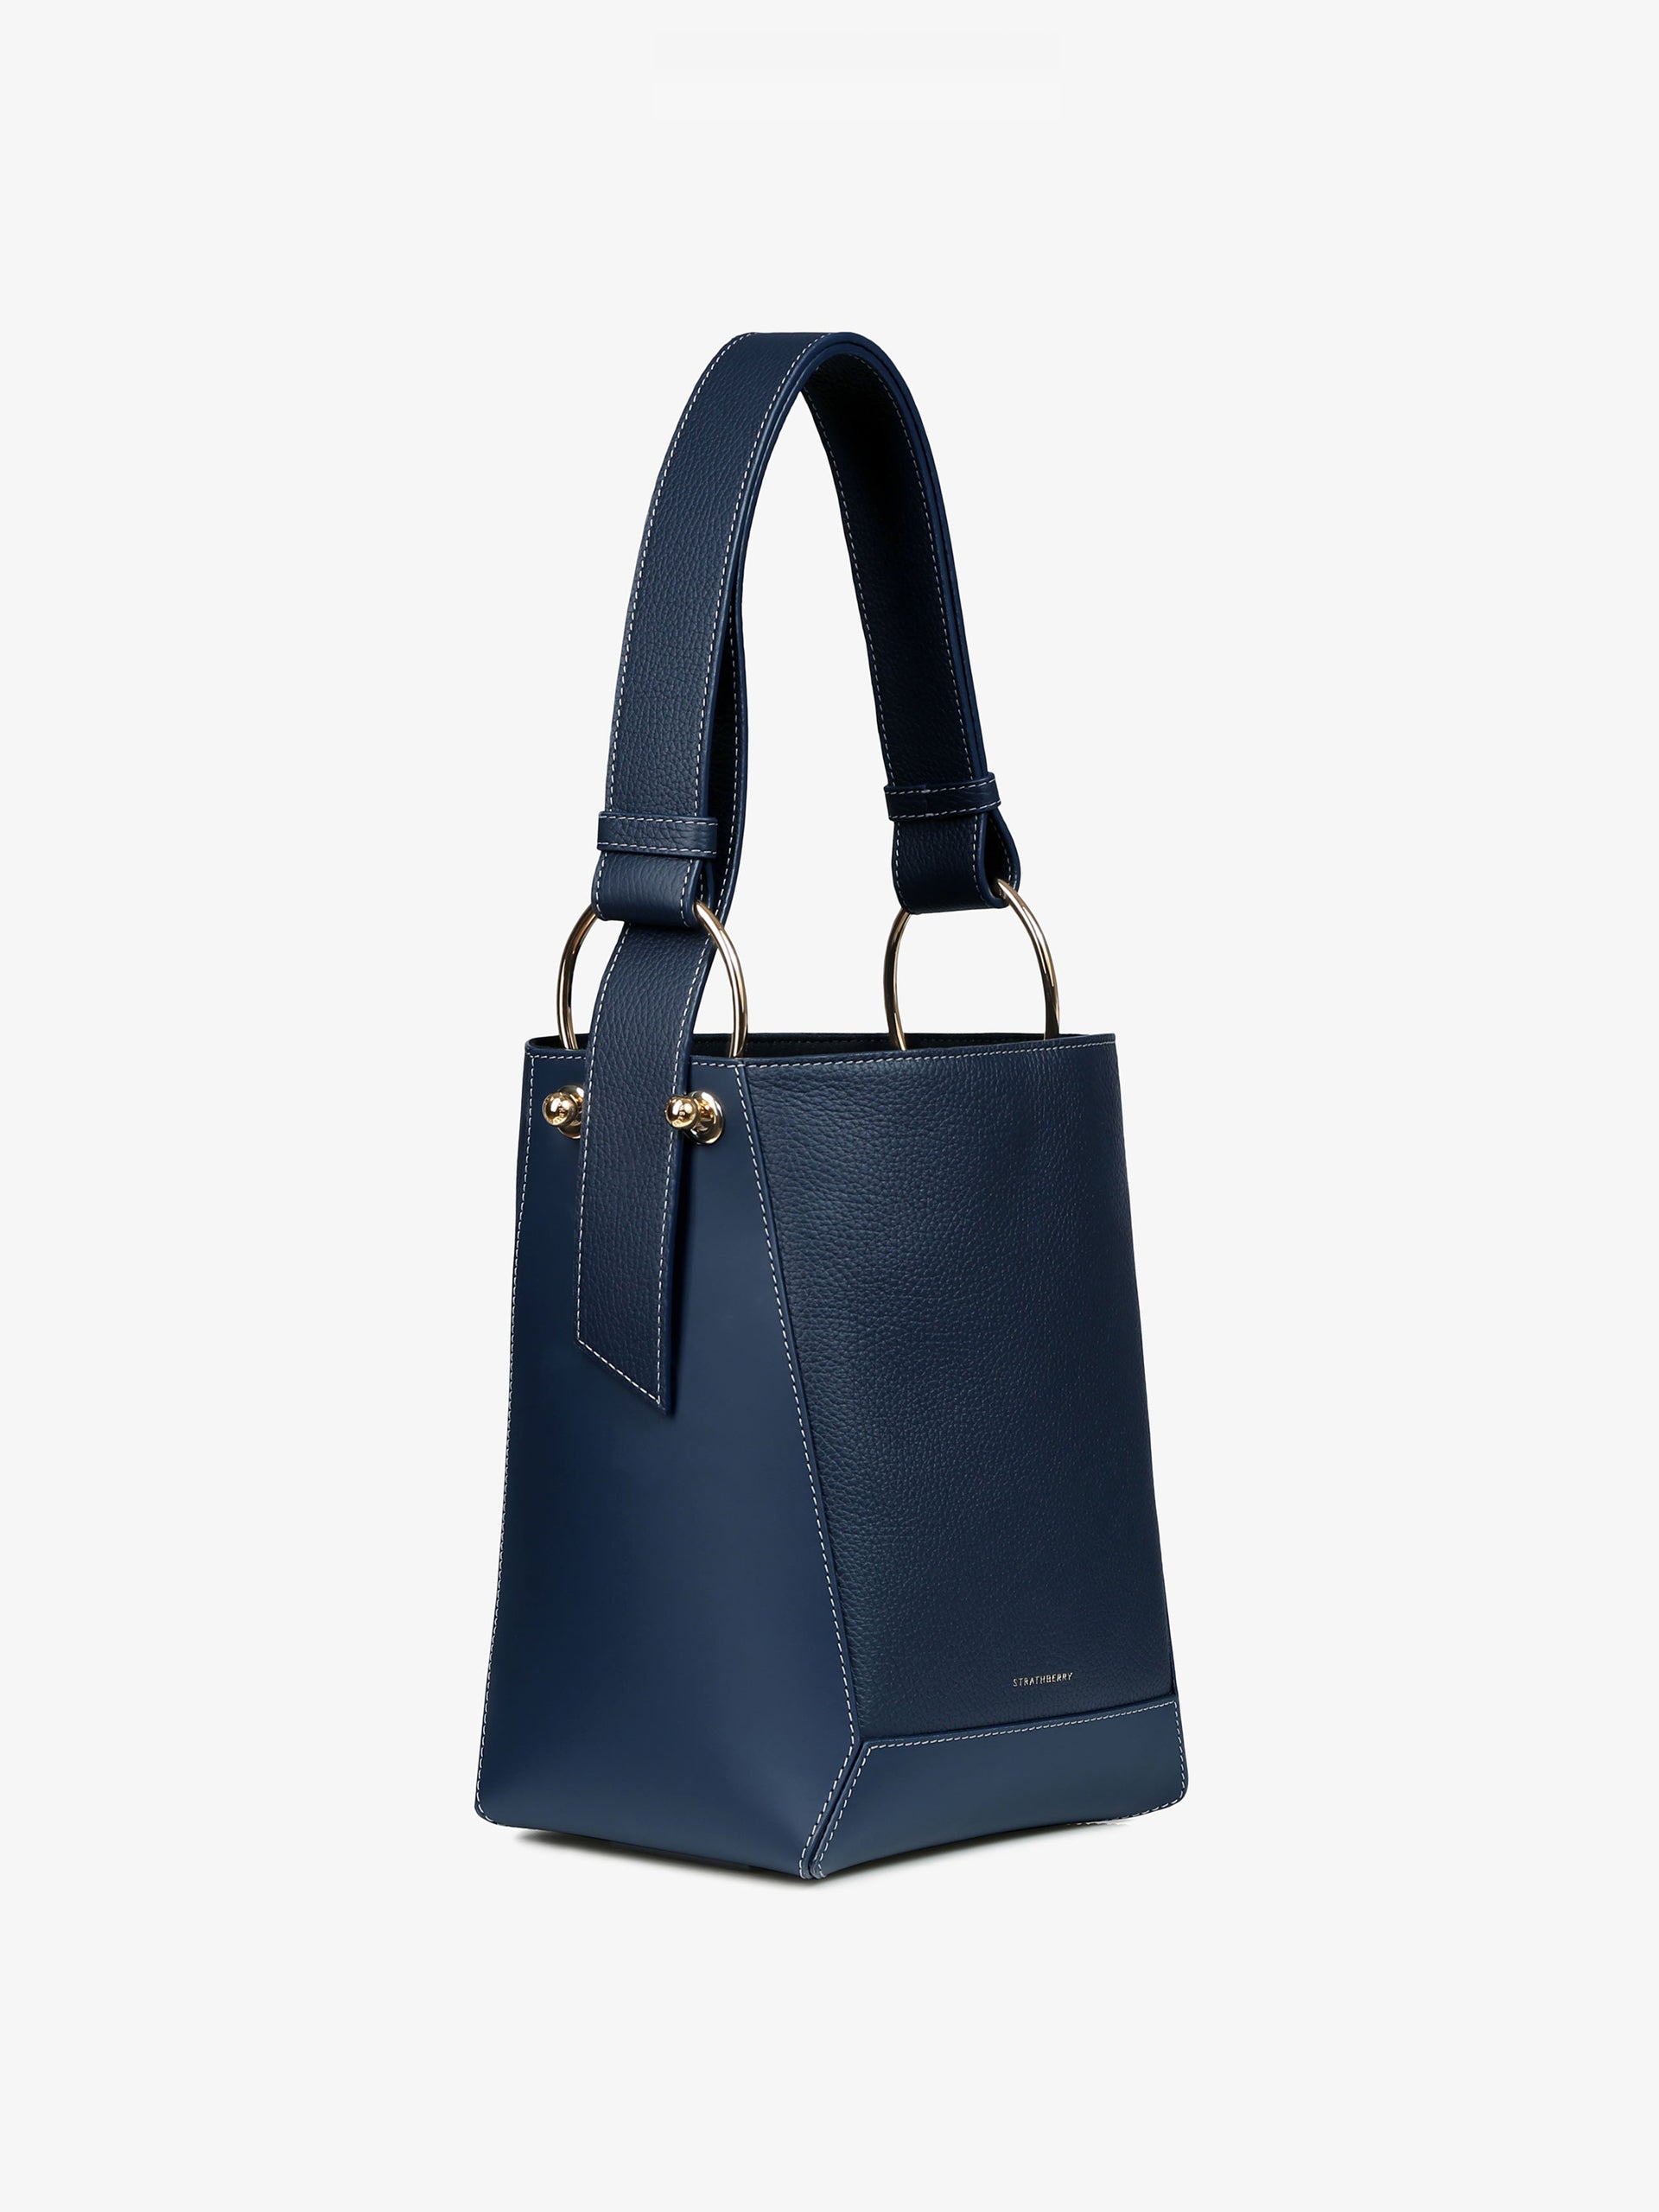 Navy Lana Midi bucket bag with grey stitching - Collagerie